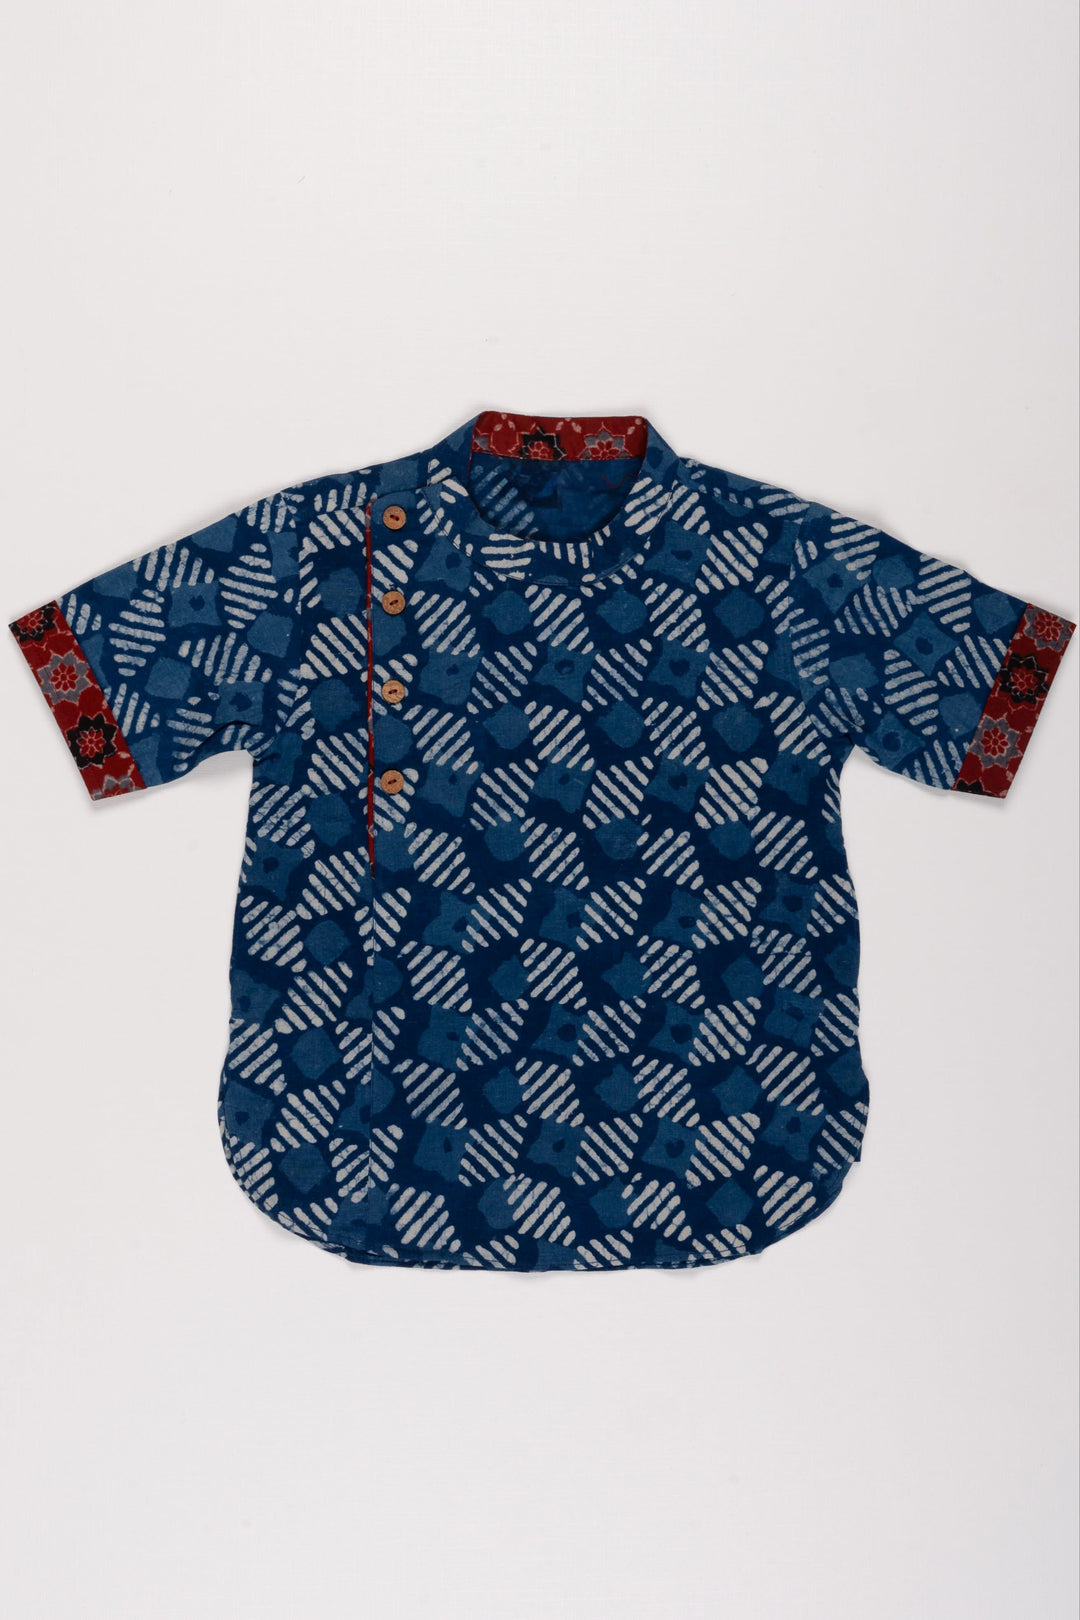 The Nesavu Boys Kurtha Shirt Boys Aesthetic Blue Cotton Shirt with Abstract Design and Unique Cuff Accents Nesavu 16 (1Y) / Blue / Cotton BS116A-16 Designer Boys Kurta Shirts Collection | Perfect for Festive Occasions | The Nesavu